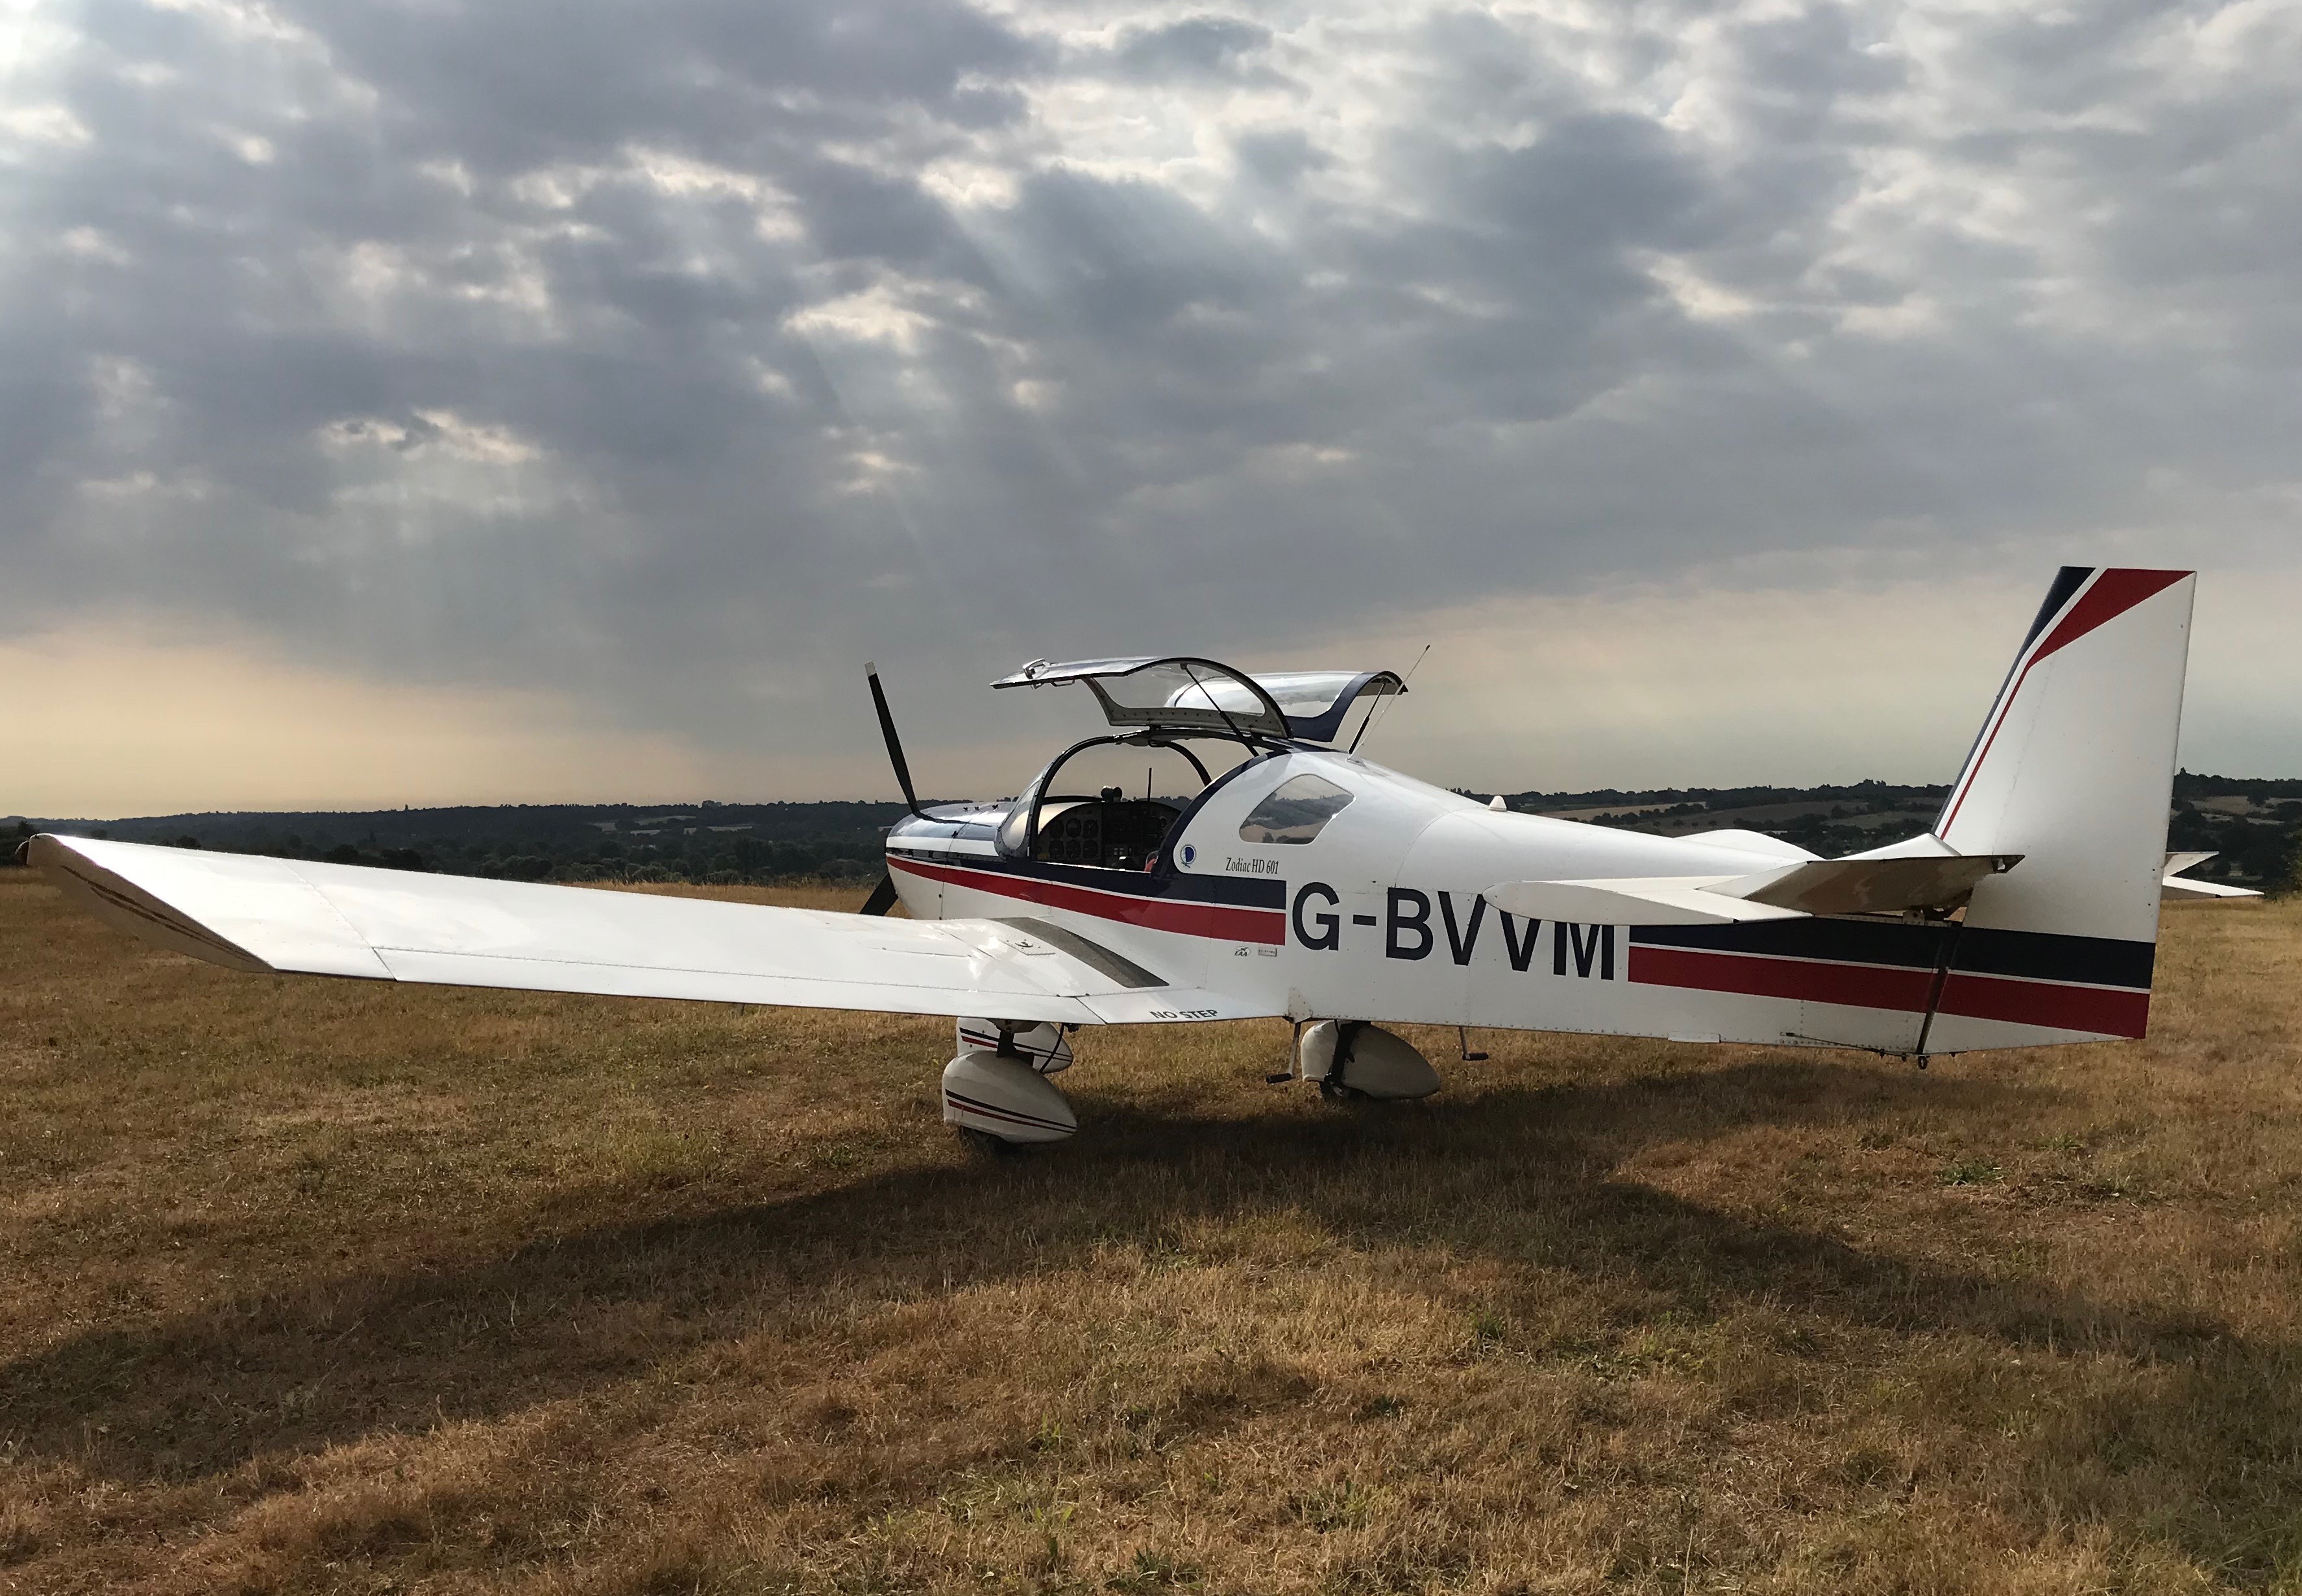 @ Nayland airfield 2018